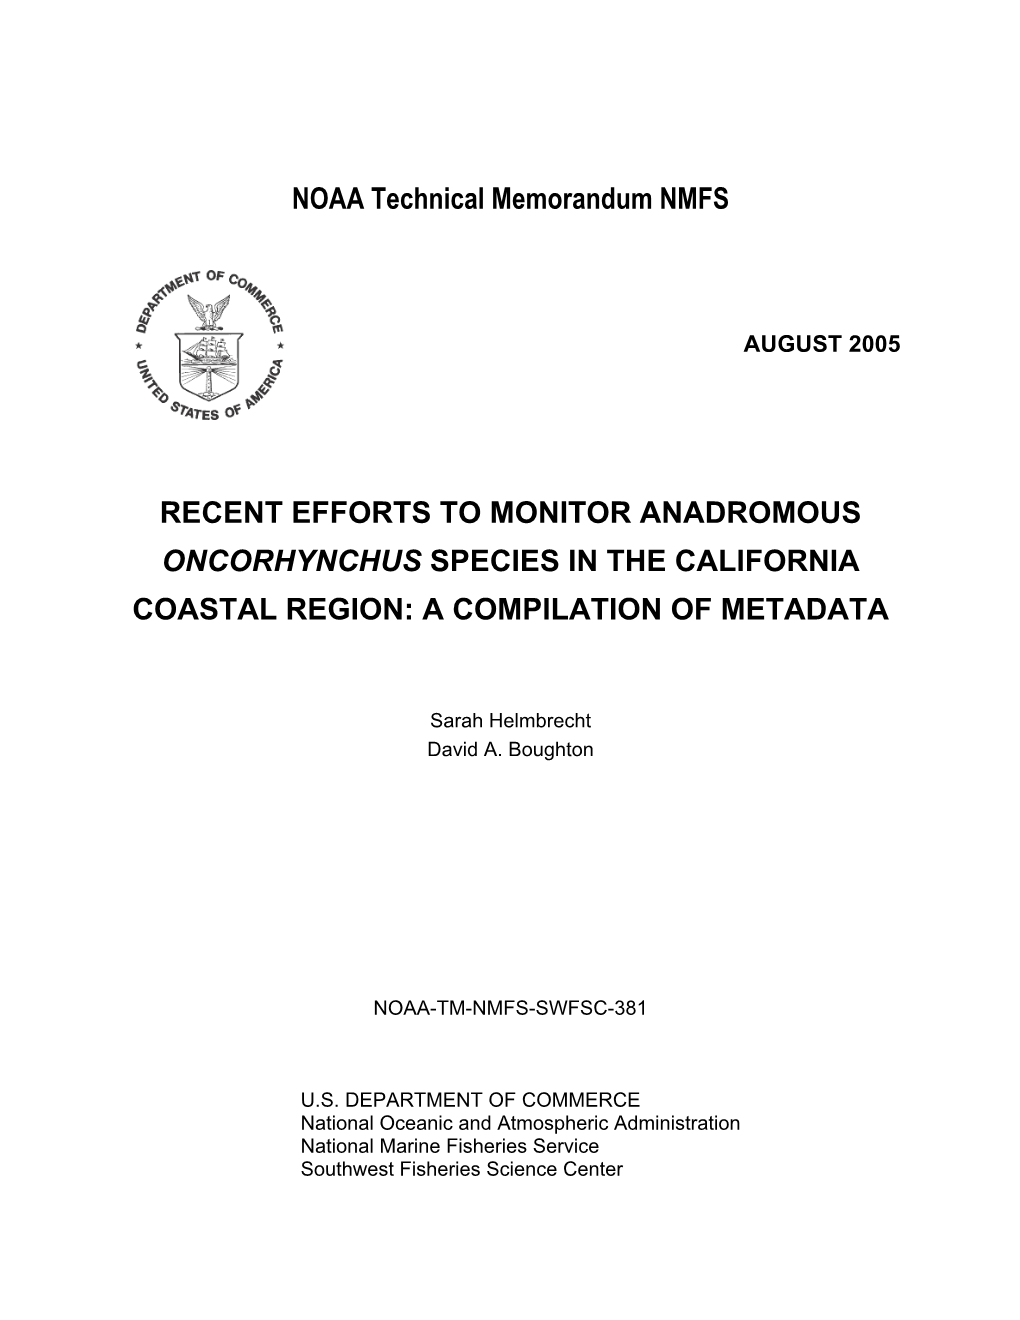 Recent Efforts to Monitor Anadromous Oncorhynchus Species in the California Coastal Region: a Compilation of Metadata